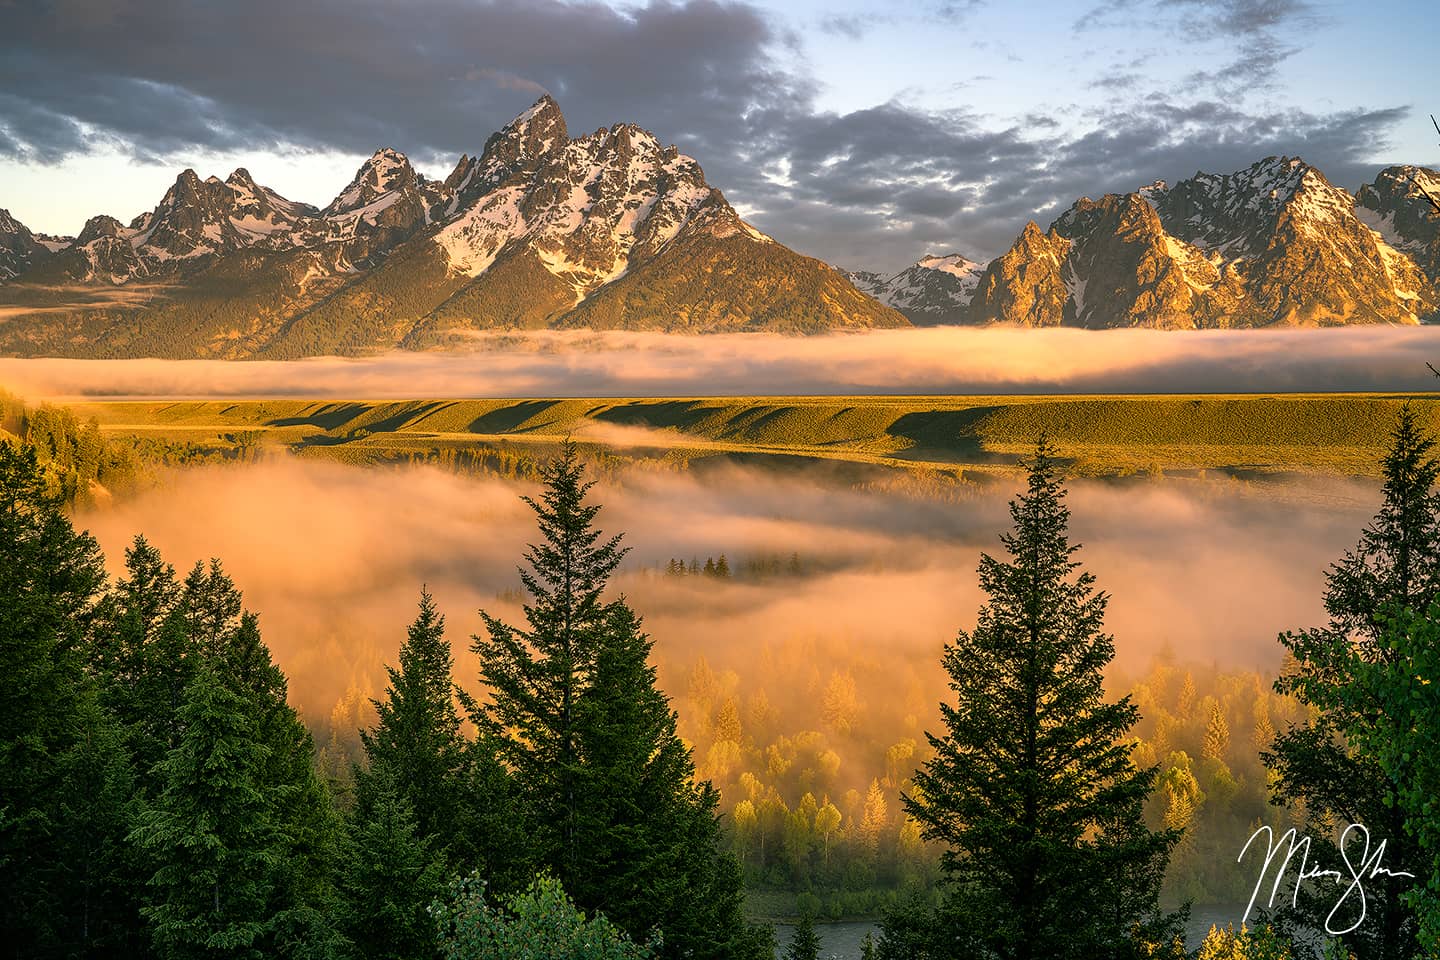 Fog fills the Snake River Valley below the majestic Tetons after sunrise